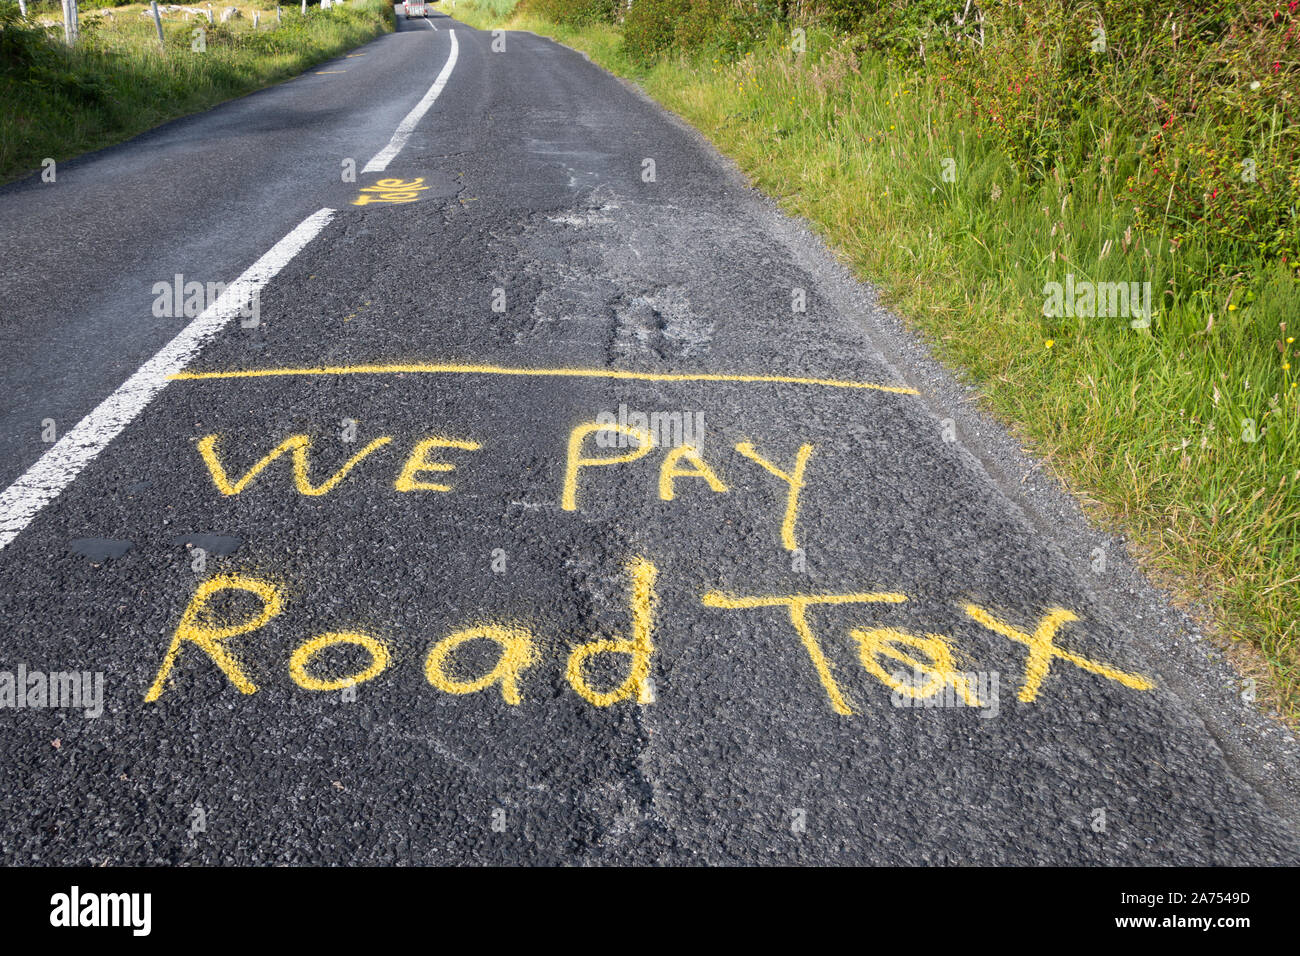 Protest signs spray painted onto the road in Ireland complaining about the poor upkeep of the Roads. We Pay Road Tax Stock Photo